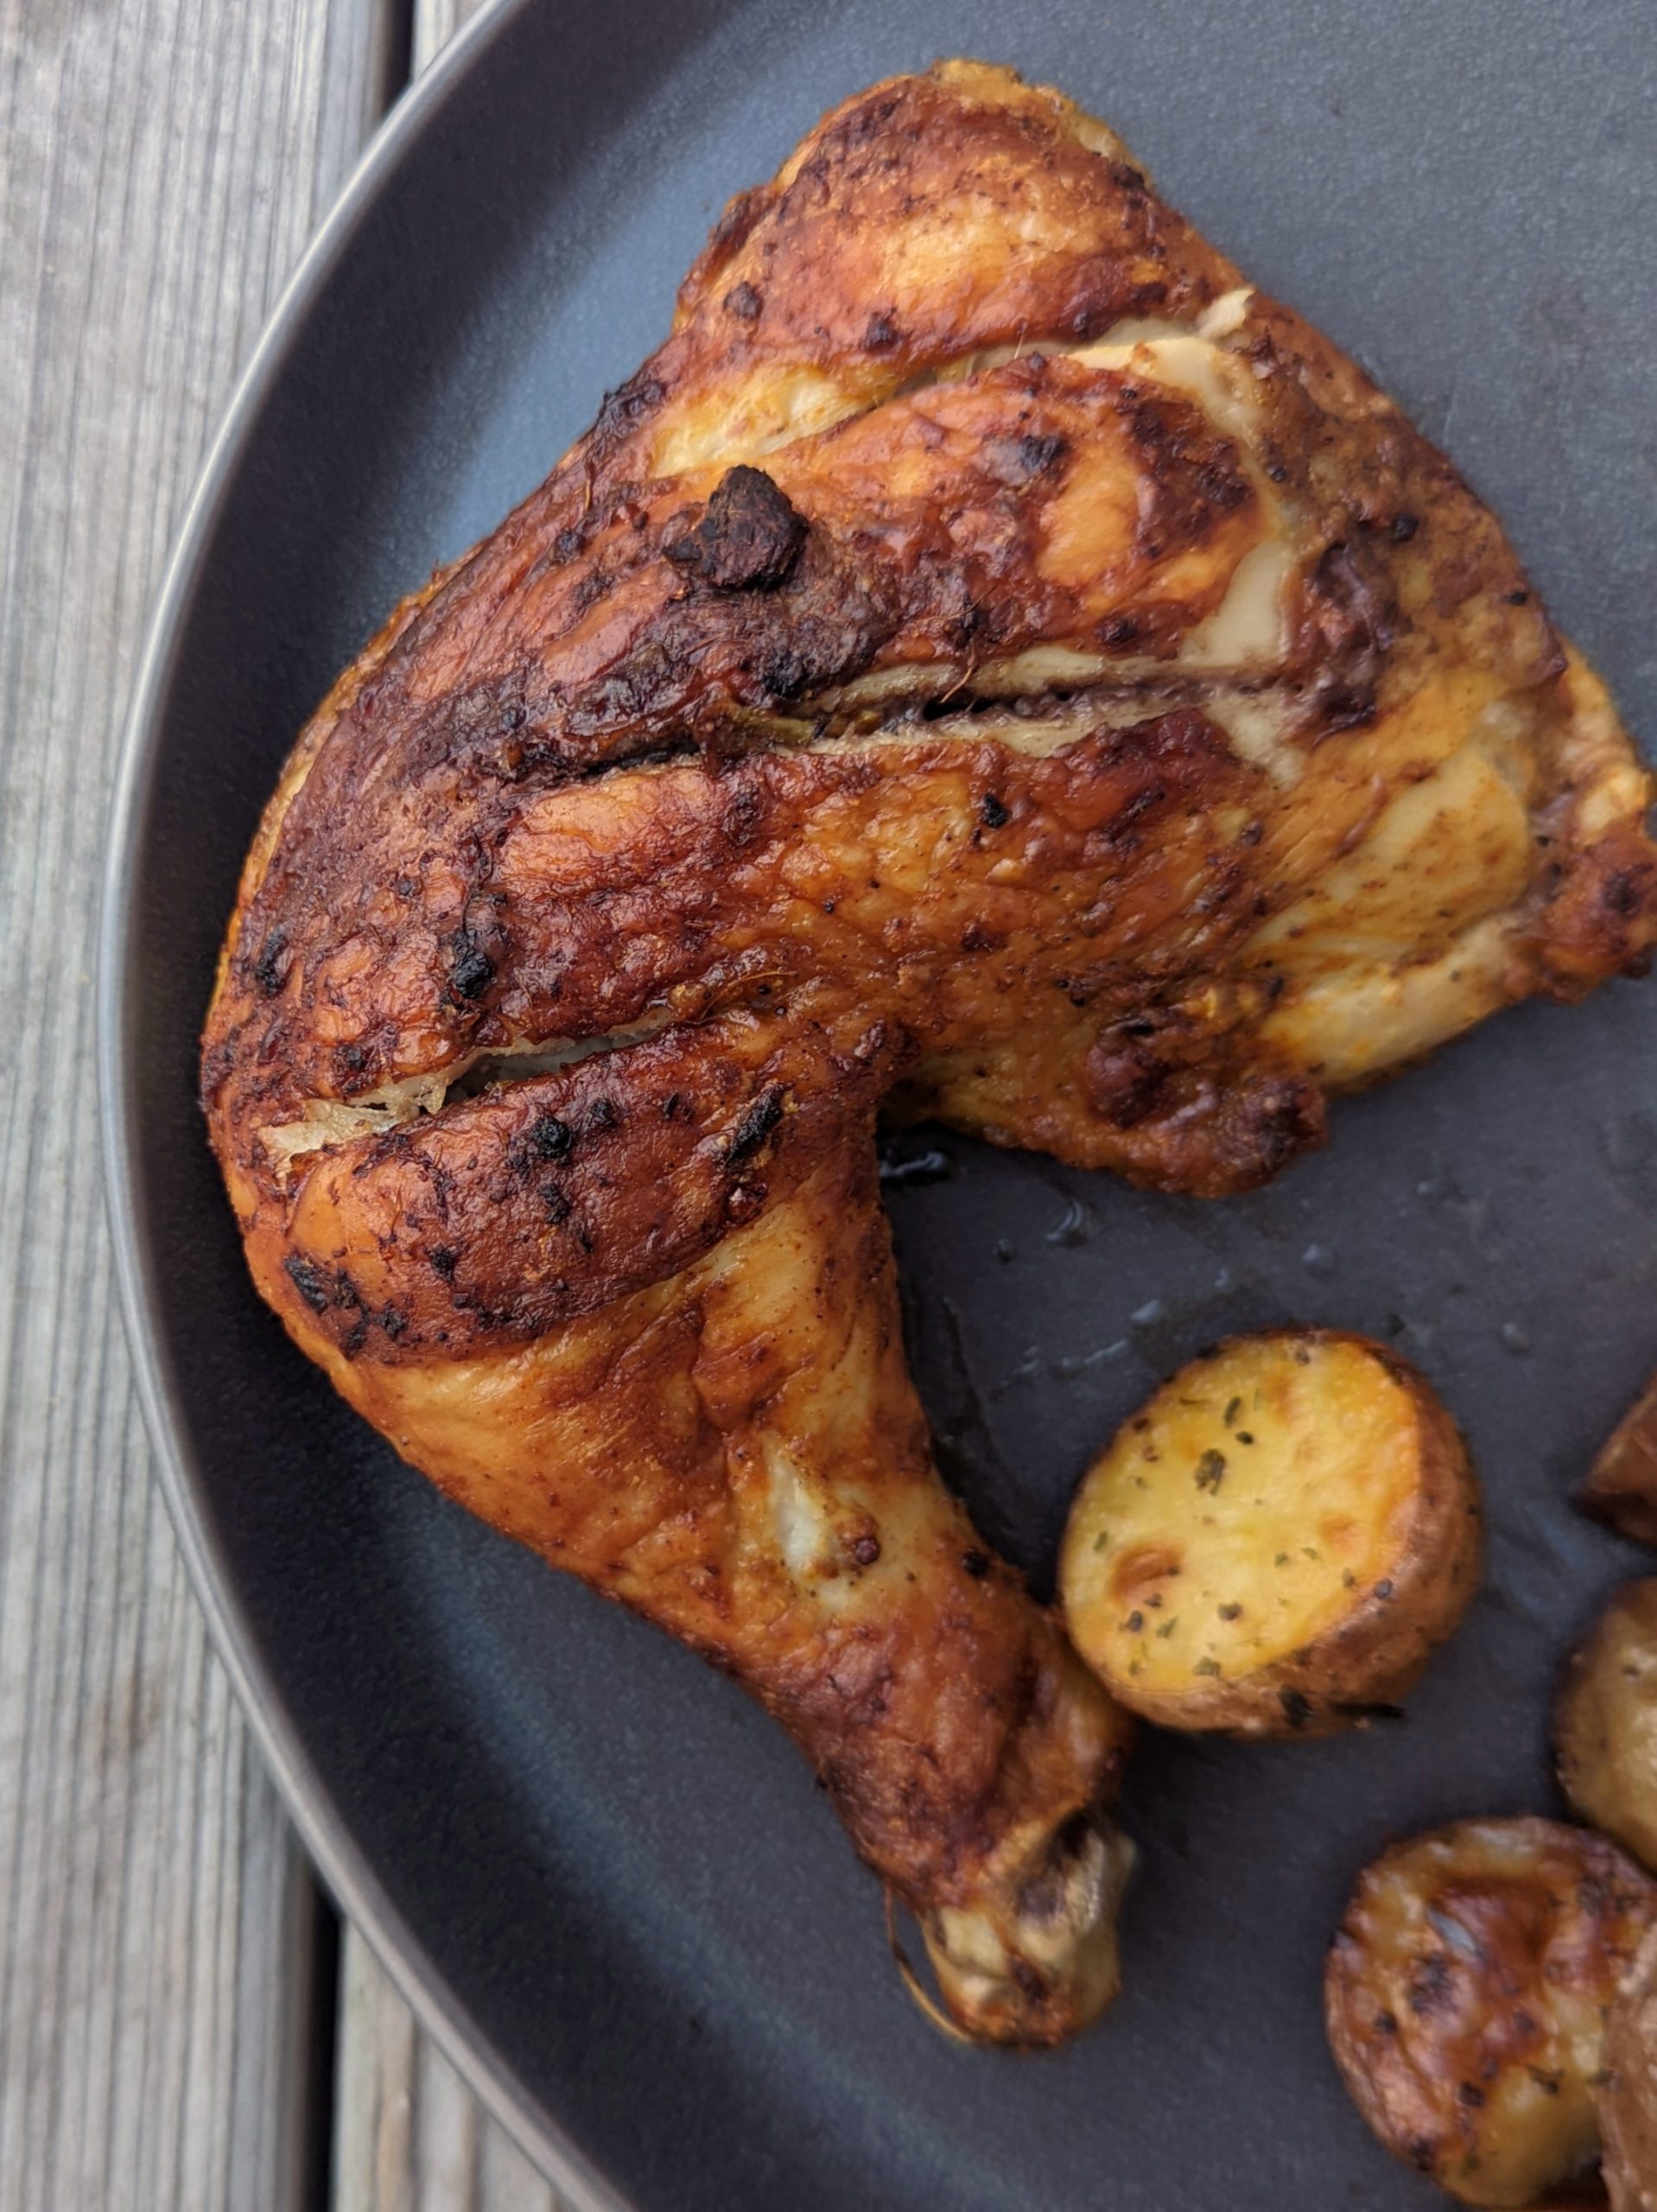 A serving of our baked tandoori chicken recipe served with raita and roasted potatoes.